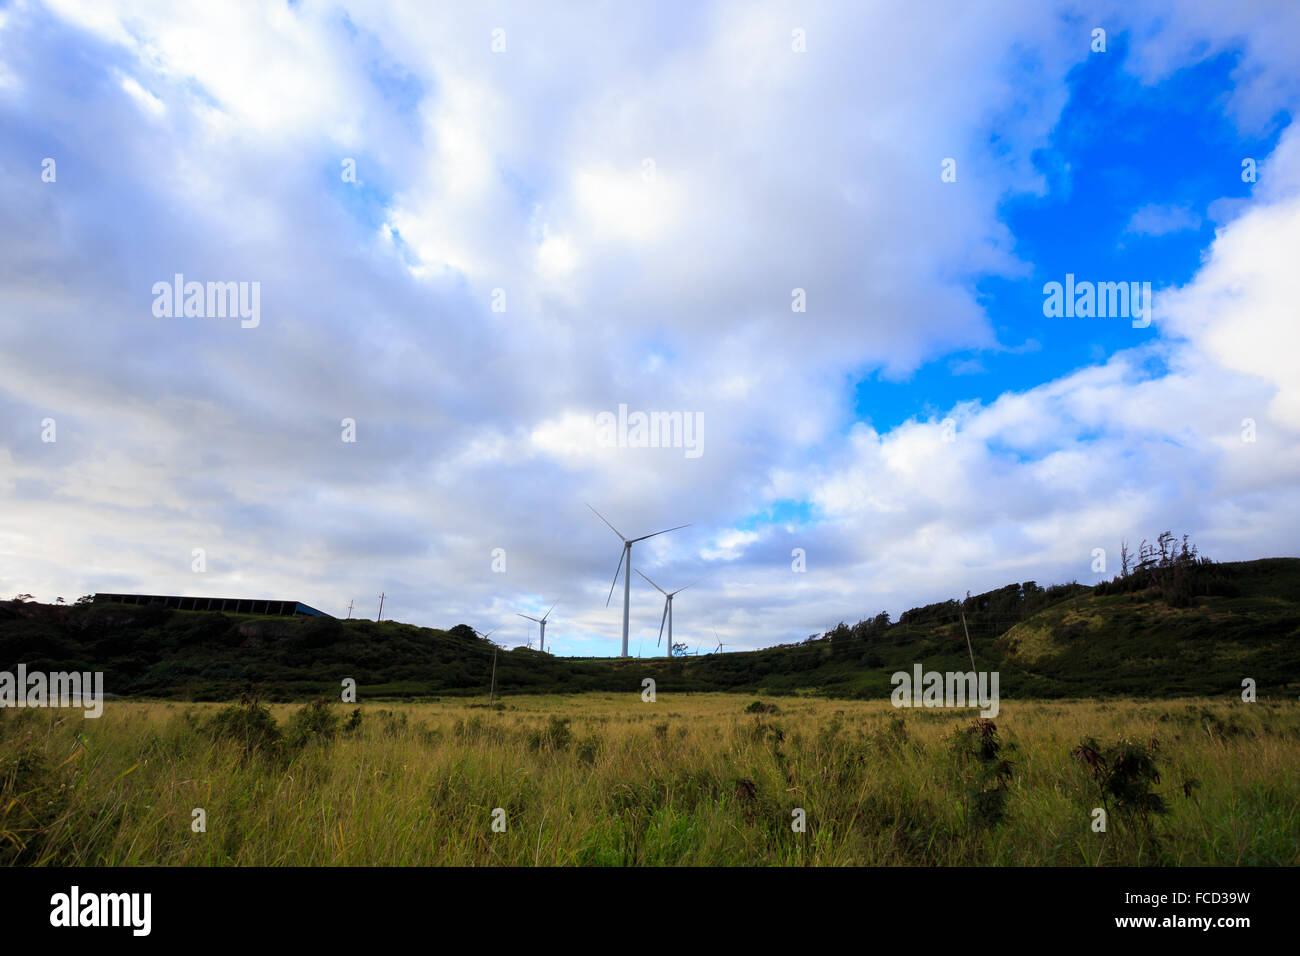 Green energy is stored up at this massive wind farm where turbines line the hills in Oahu Hawaii. Sustainable, renewable energy. Stock Photo